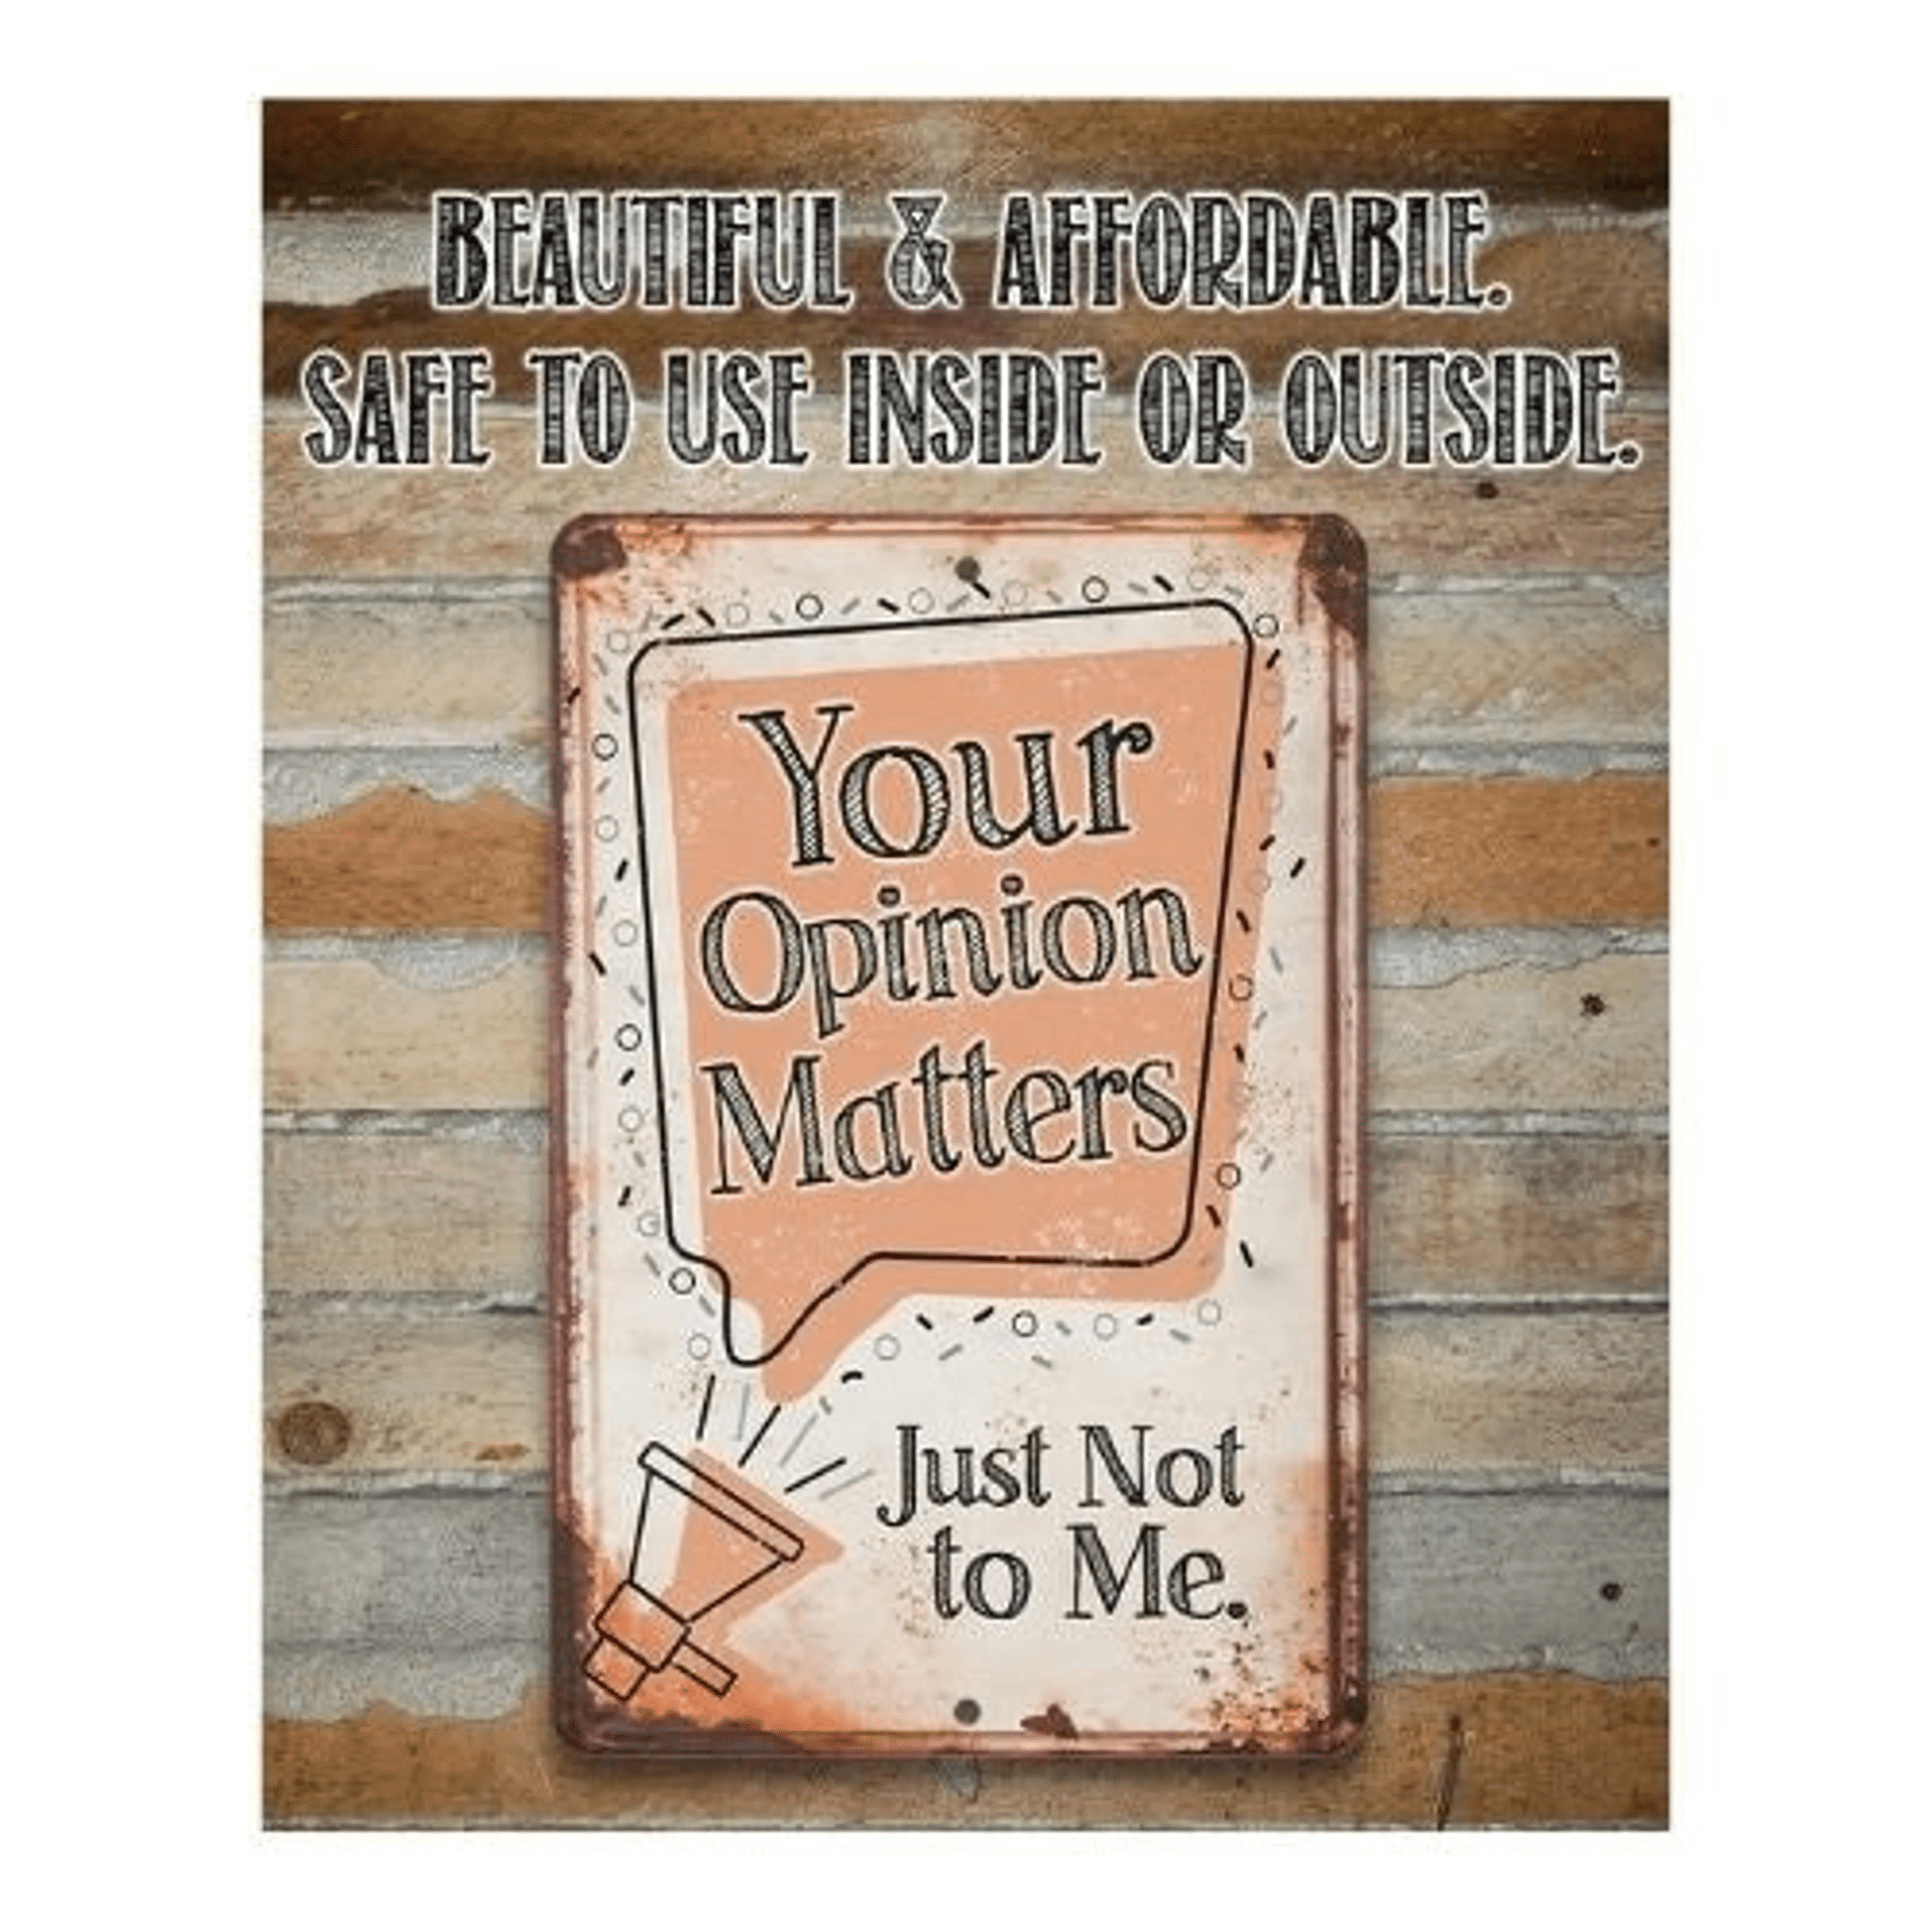 Your Opinion Matters Just Not to Me Aluminum Tin Awesome Metal Poster